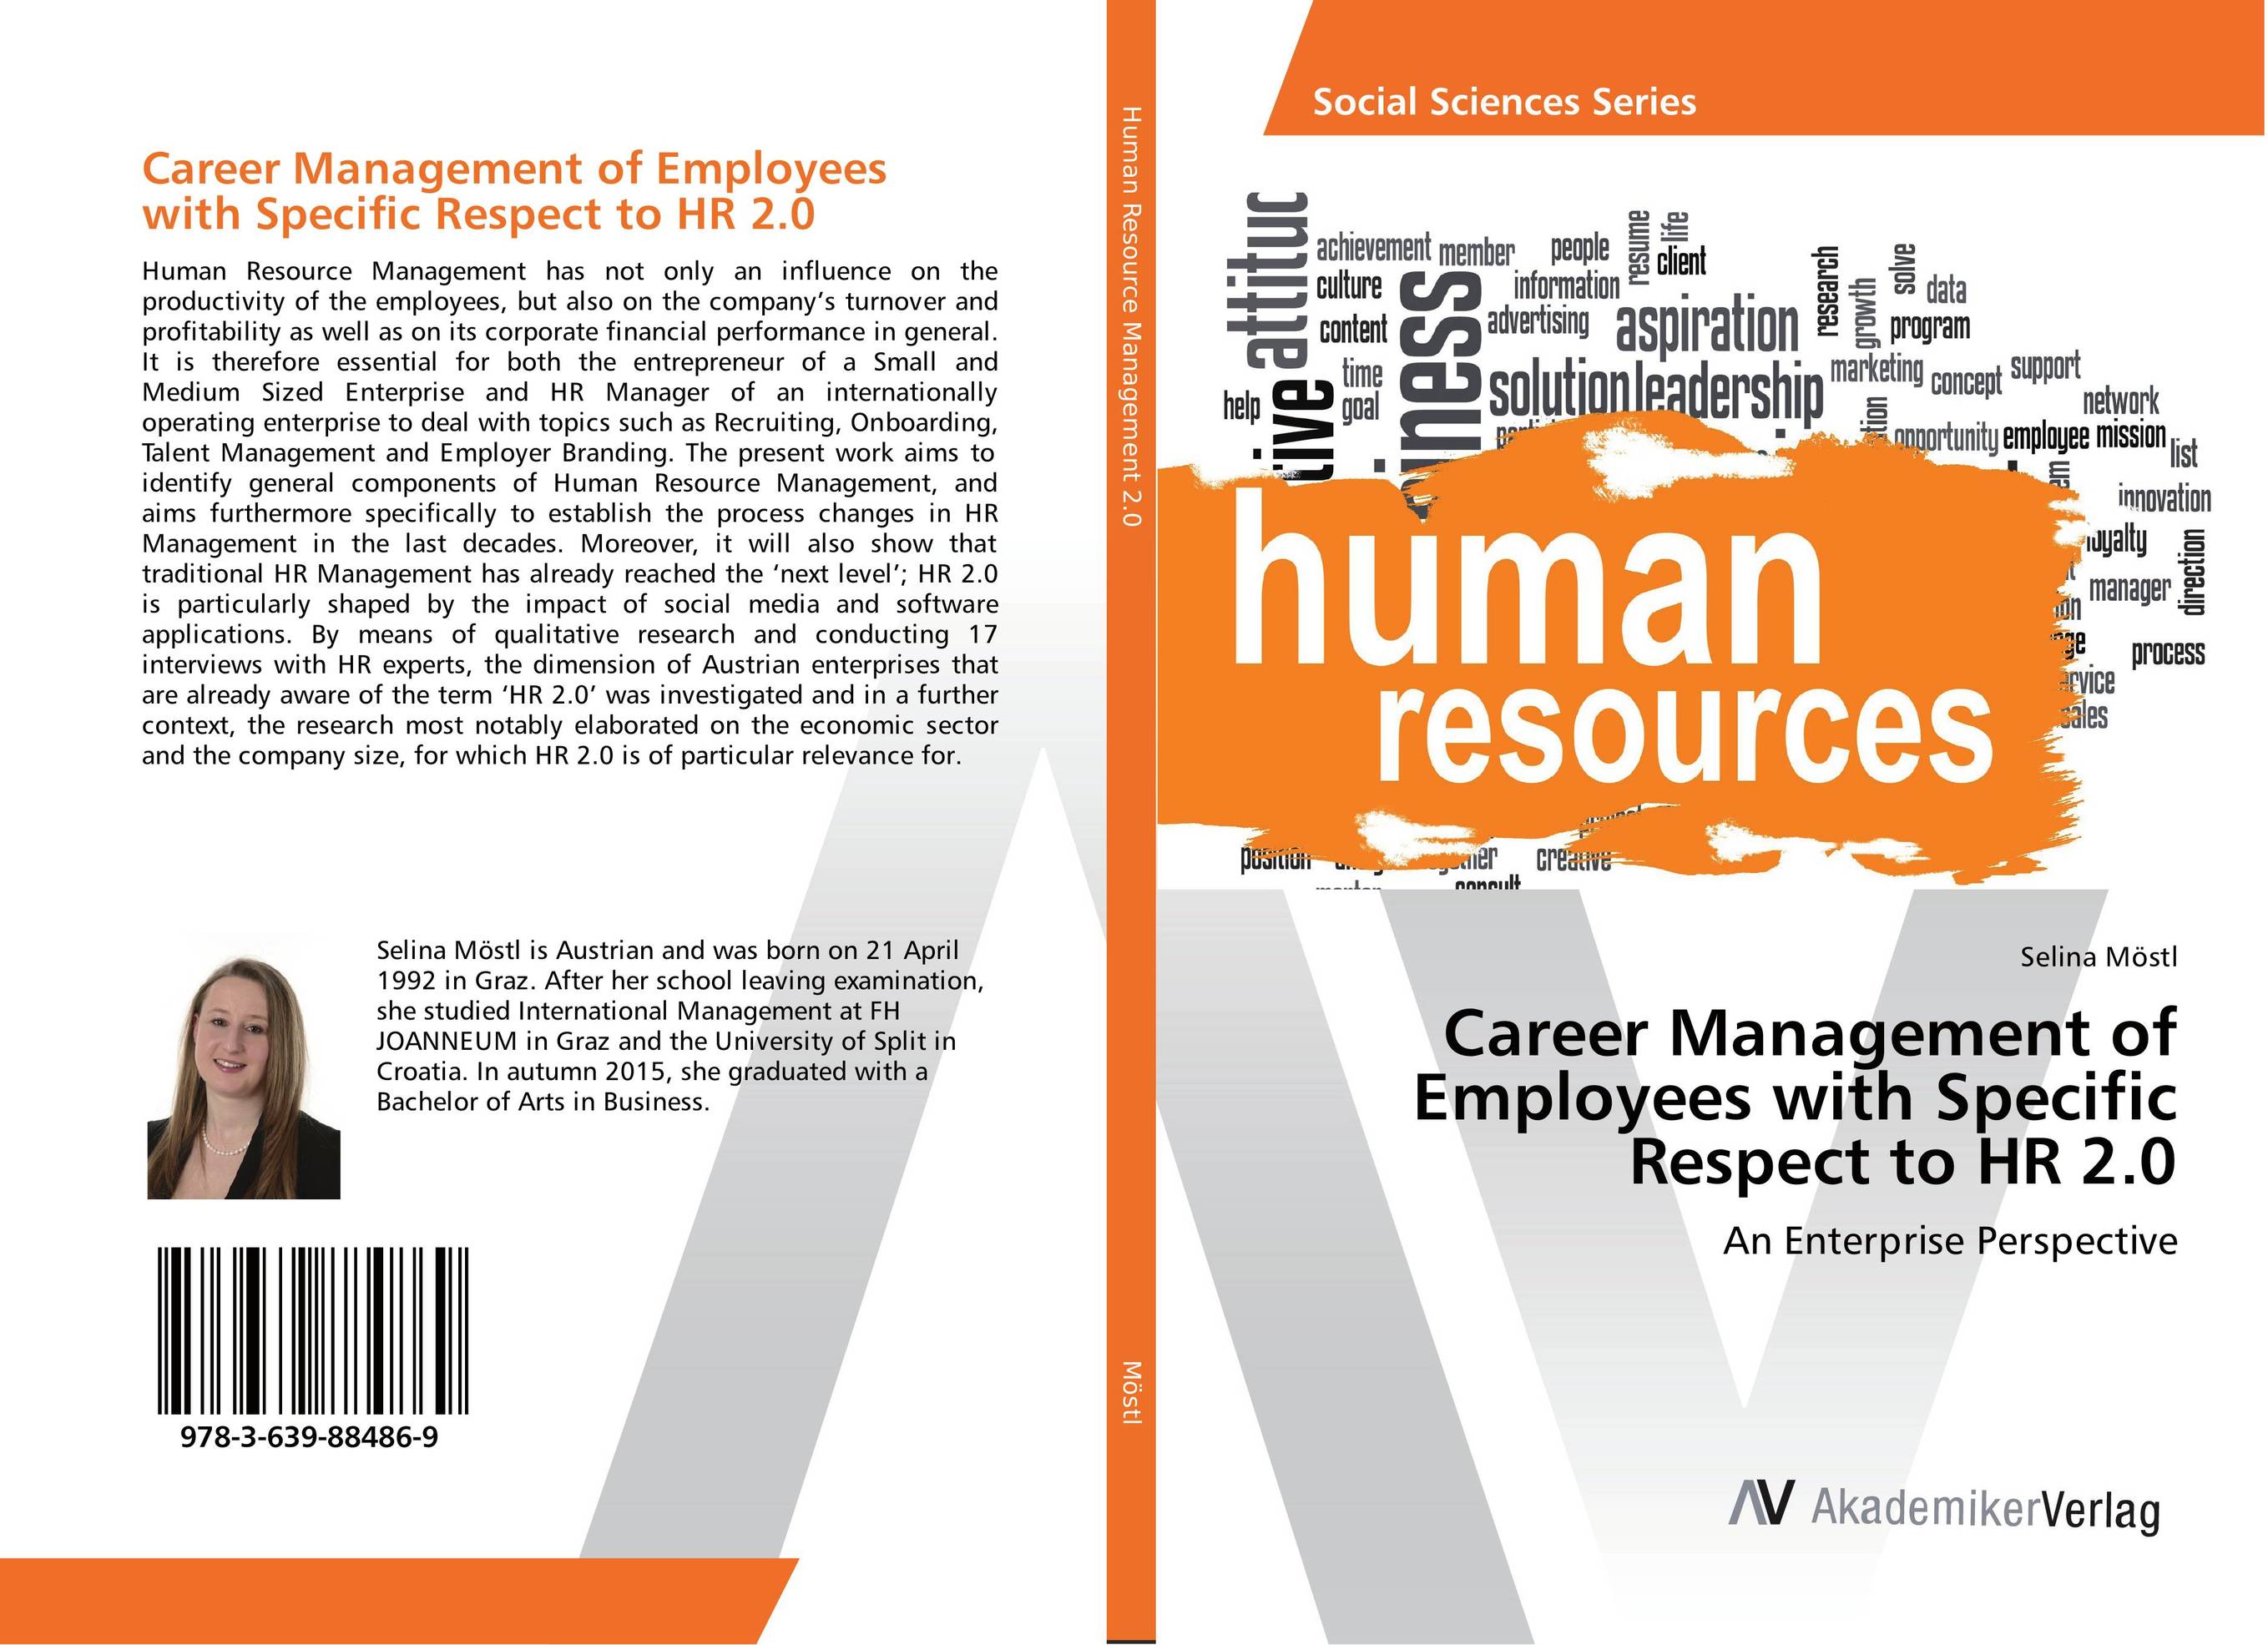 Career Management of Employees with Specific Respect to HR 2.0